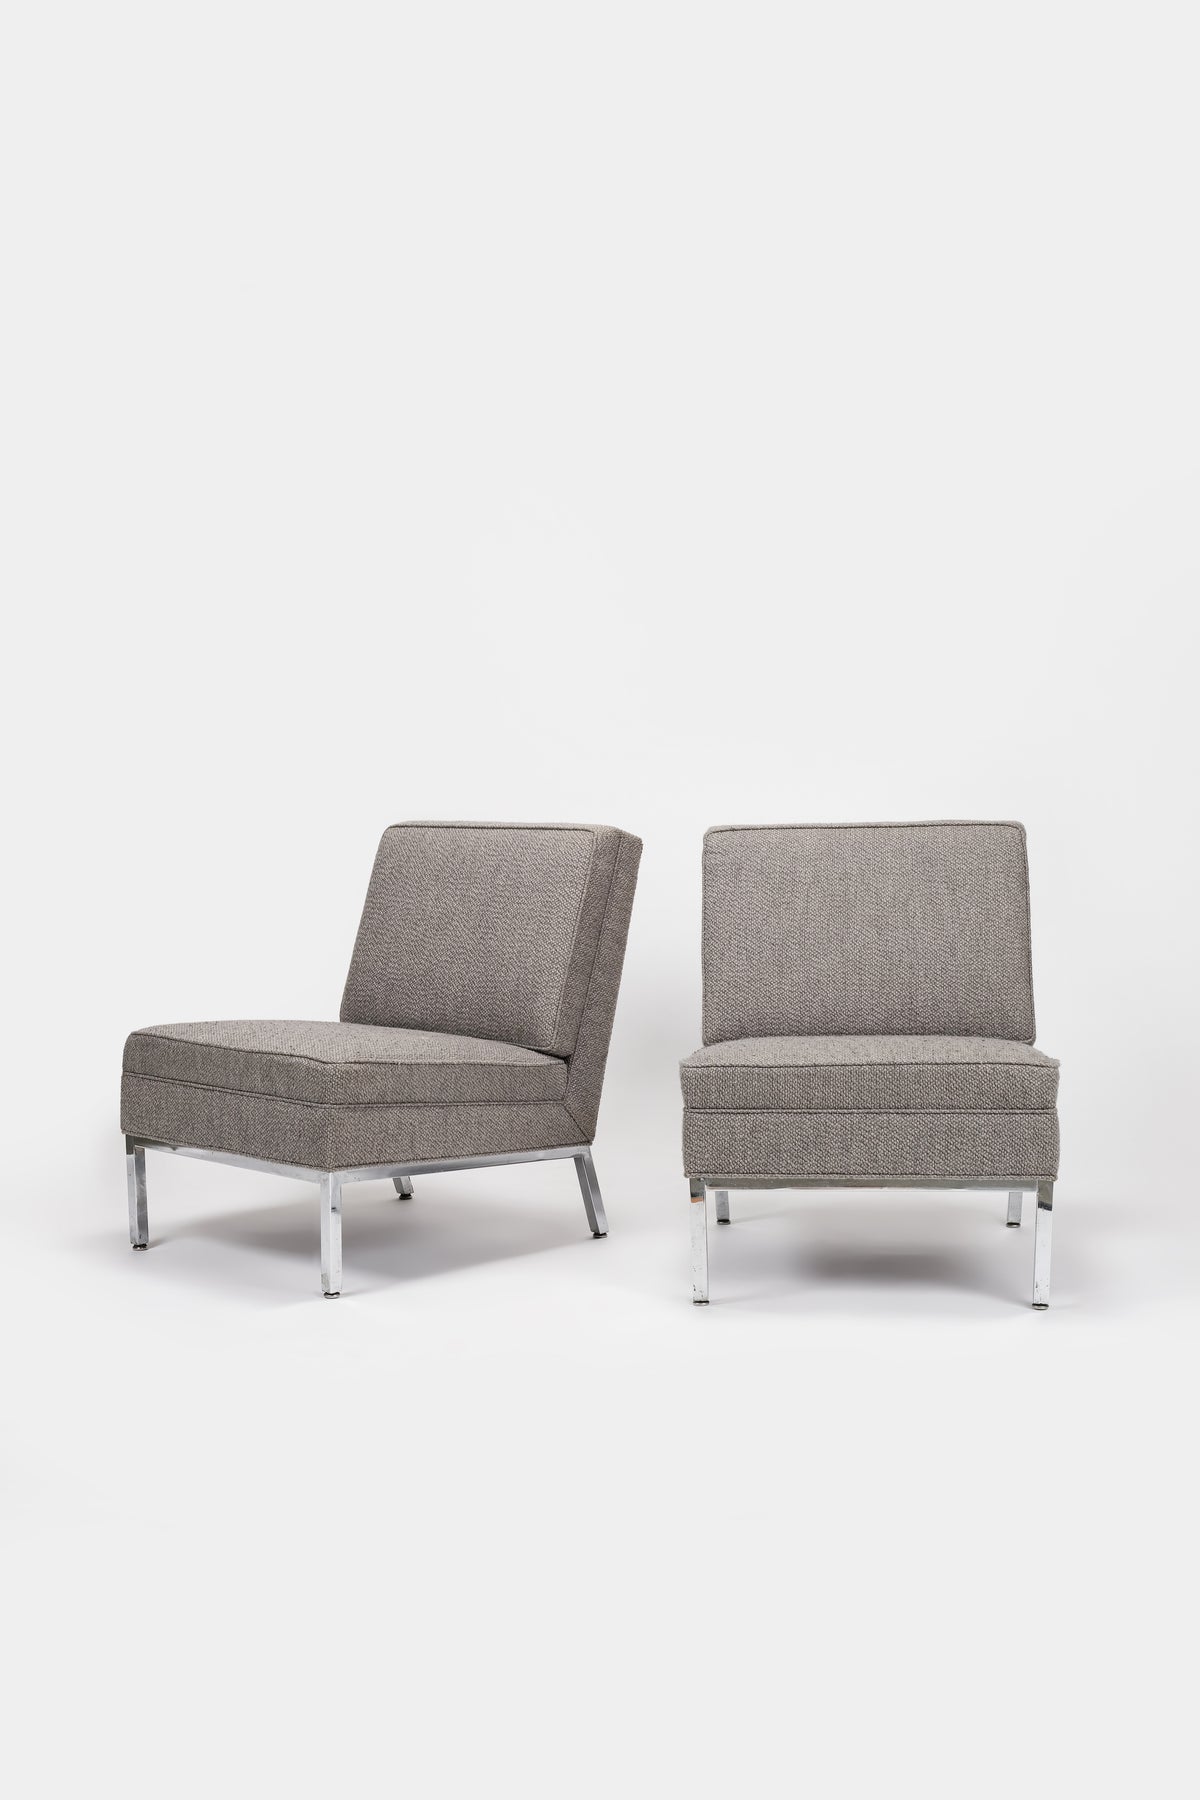 Pair of Armchairs, Steelcase Production California, 60s